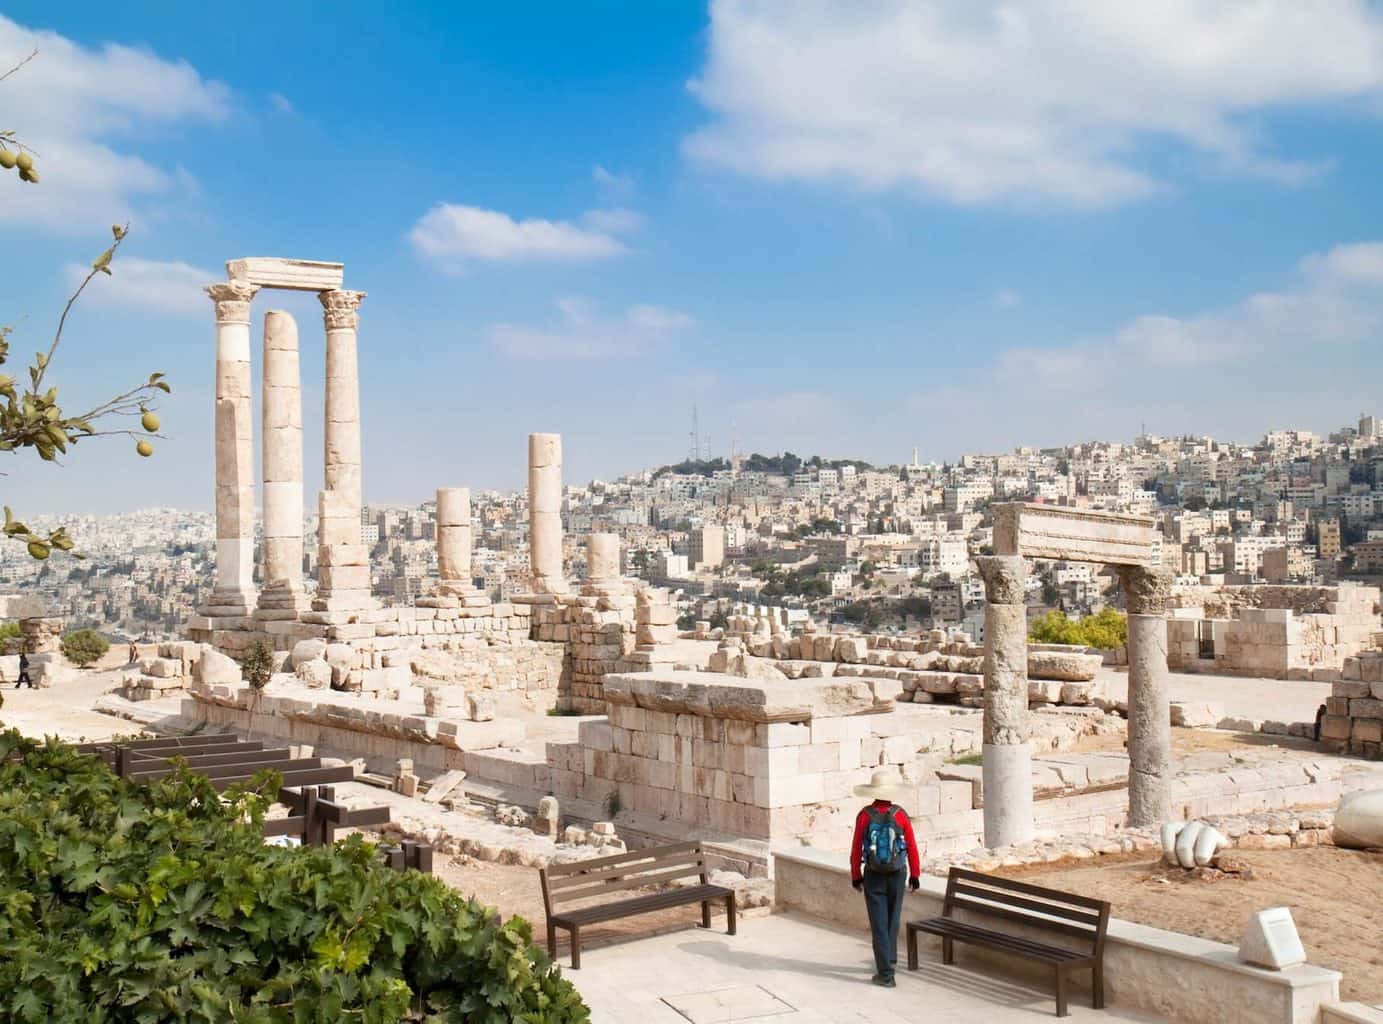 Luxury Holidays to Amman - Architecture and city view